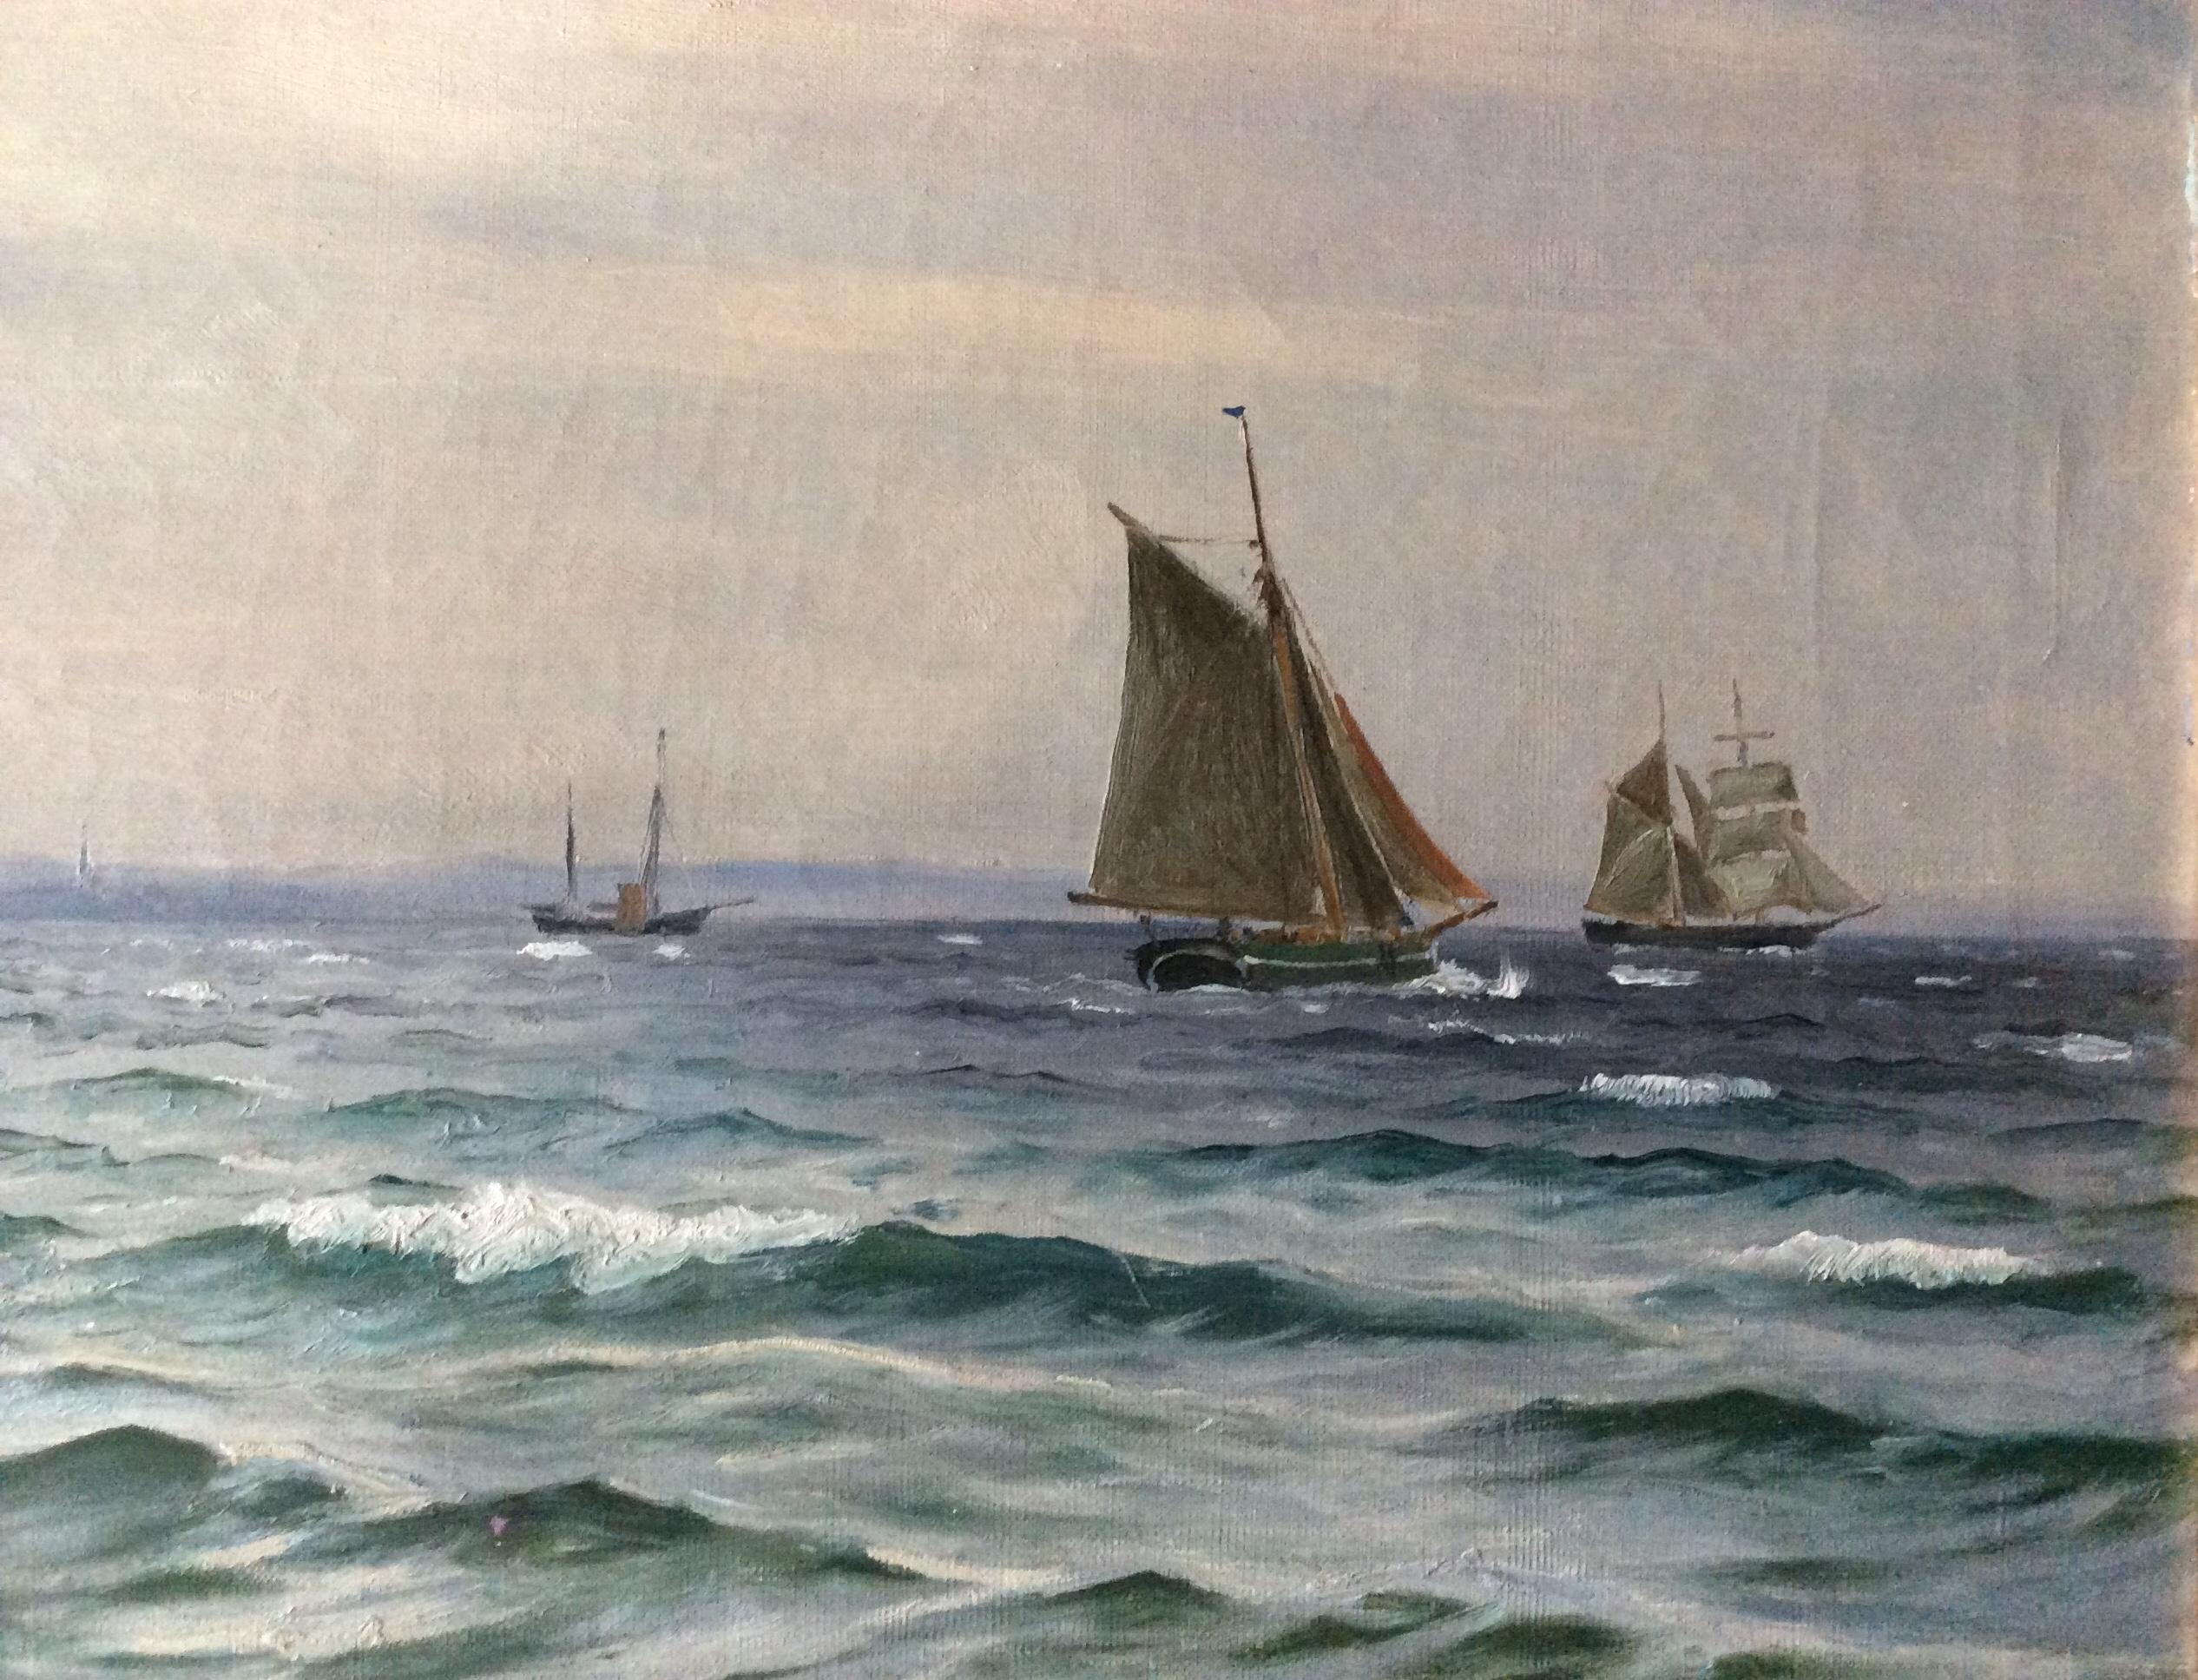 Christian Blache seascape with numerous sailing ships at sea
Signed and dated Chr. Blache 97 oil on canvas size with frame
W 73, H 49, D 5 all in cm without frame W 63, H 39
Christian Blache born Denmark 1838-1920
Few peelings and retouch.